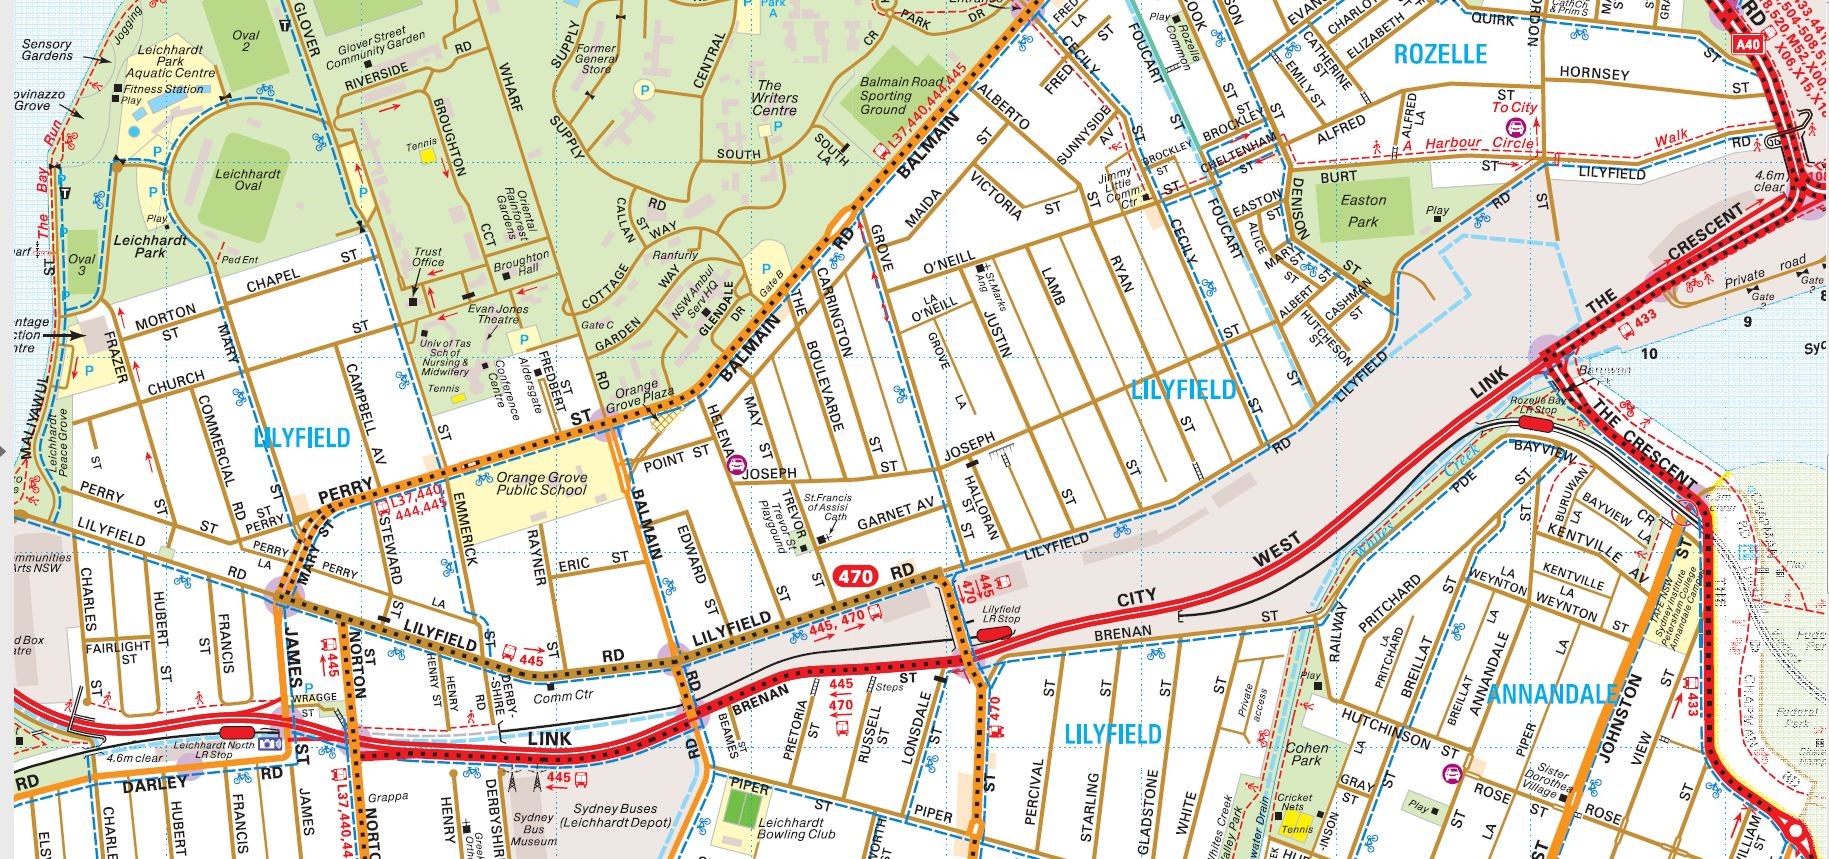  Map Rozelle showing cycle way 3 Alt Text*